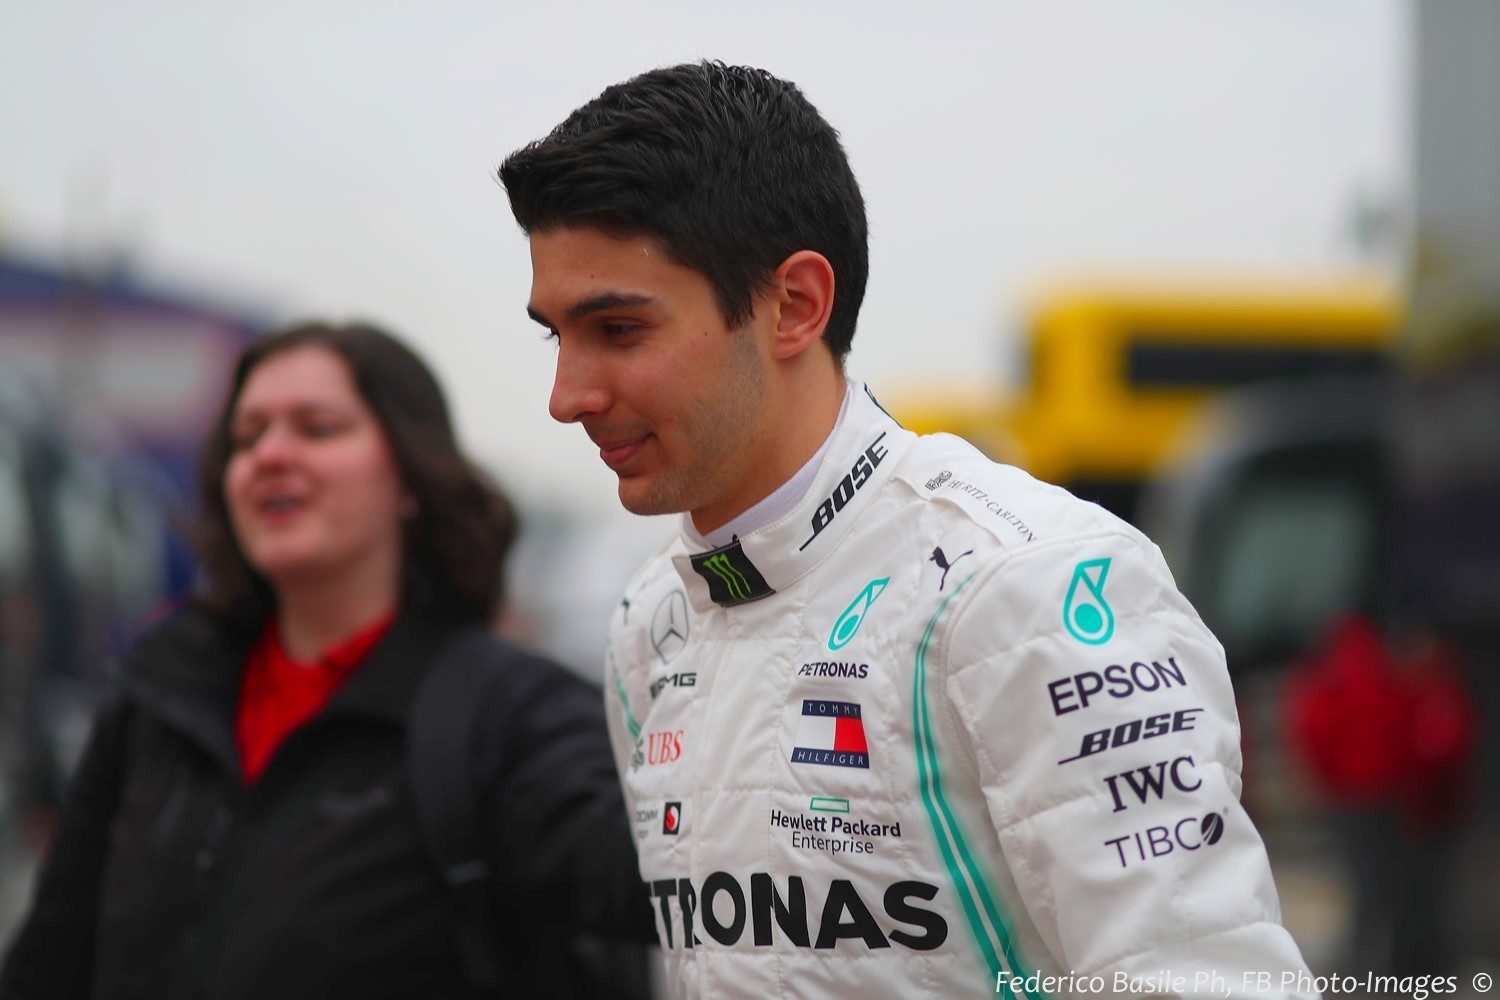 Ocon crashed his teammate Sergio Perez just about every other race when at Force India. He won't last long at Mercedes if he takes out Hamilton